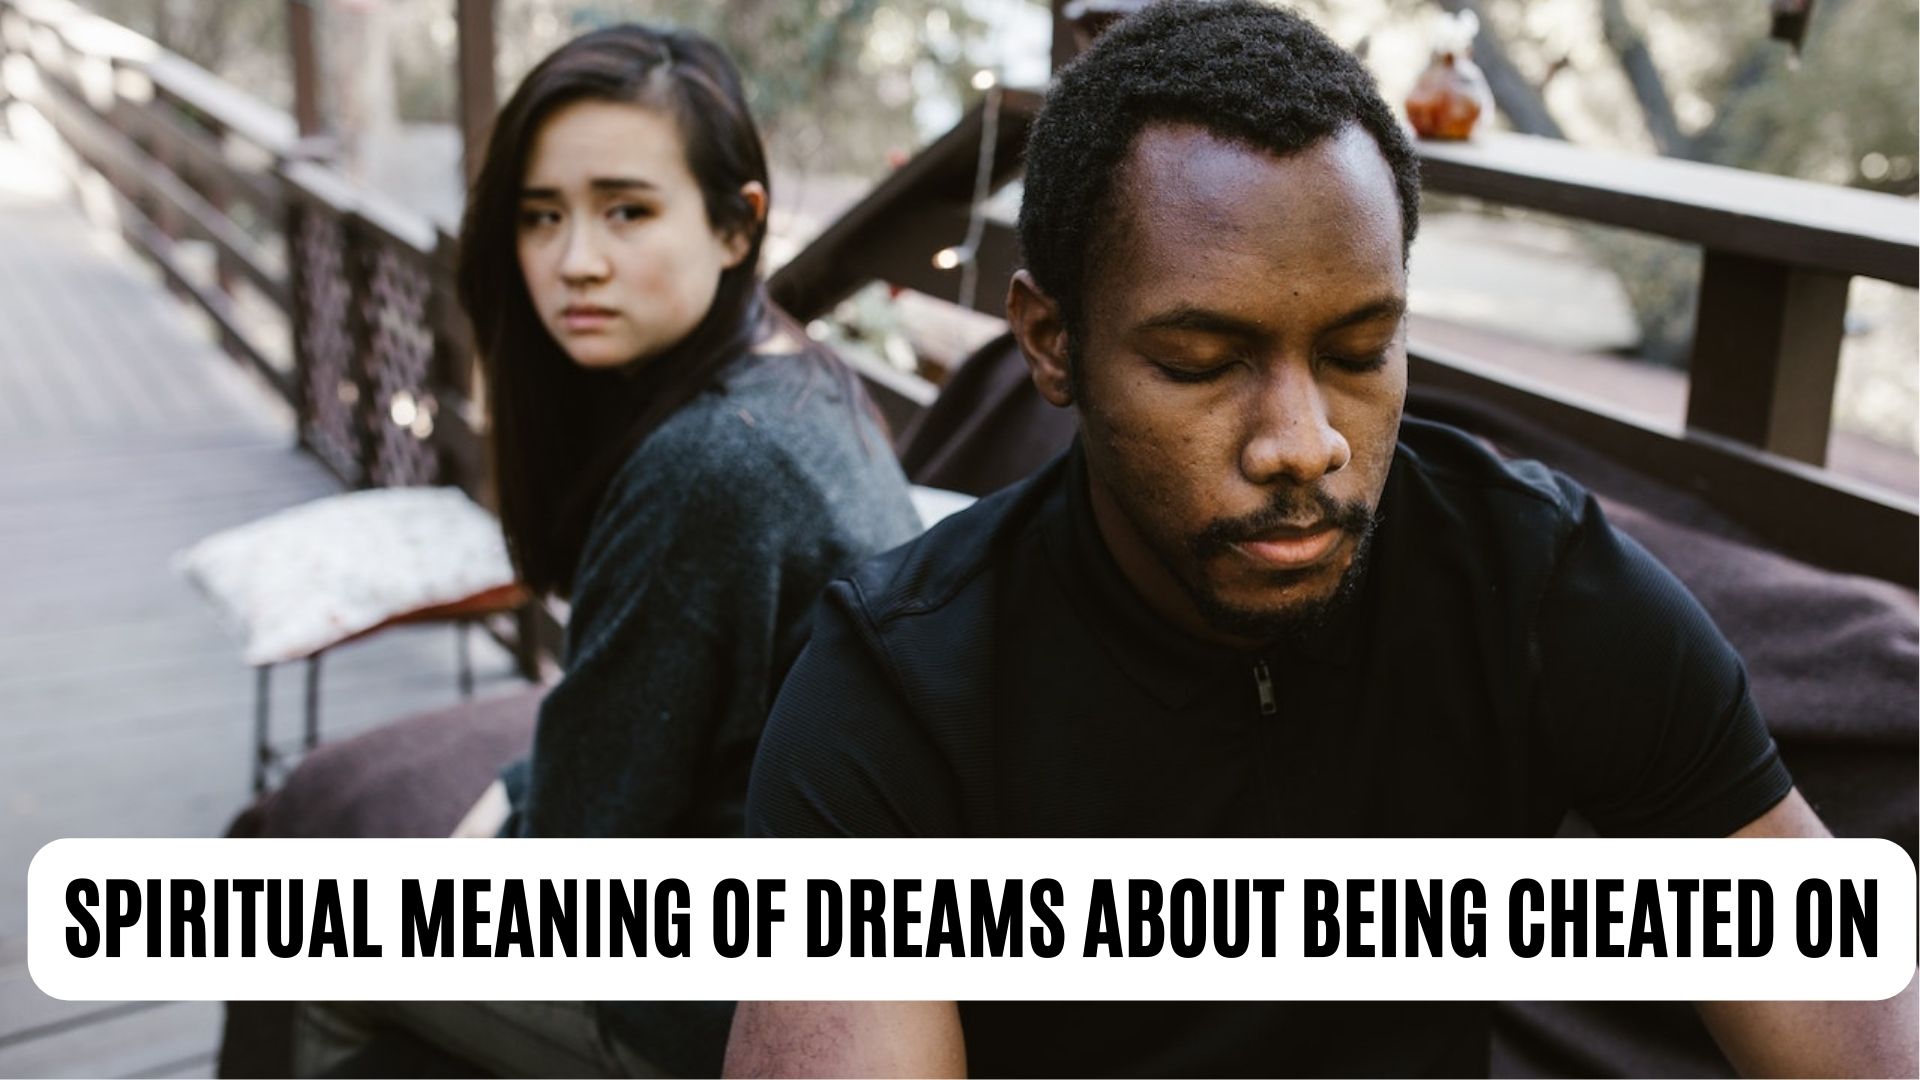 What Is The Spiritual Meaning Of Dreams About Being Cheated On?